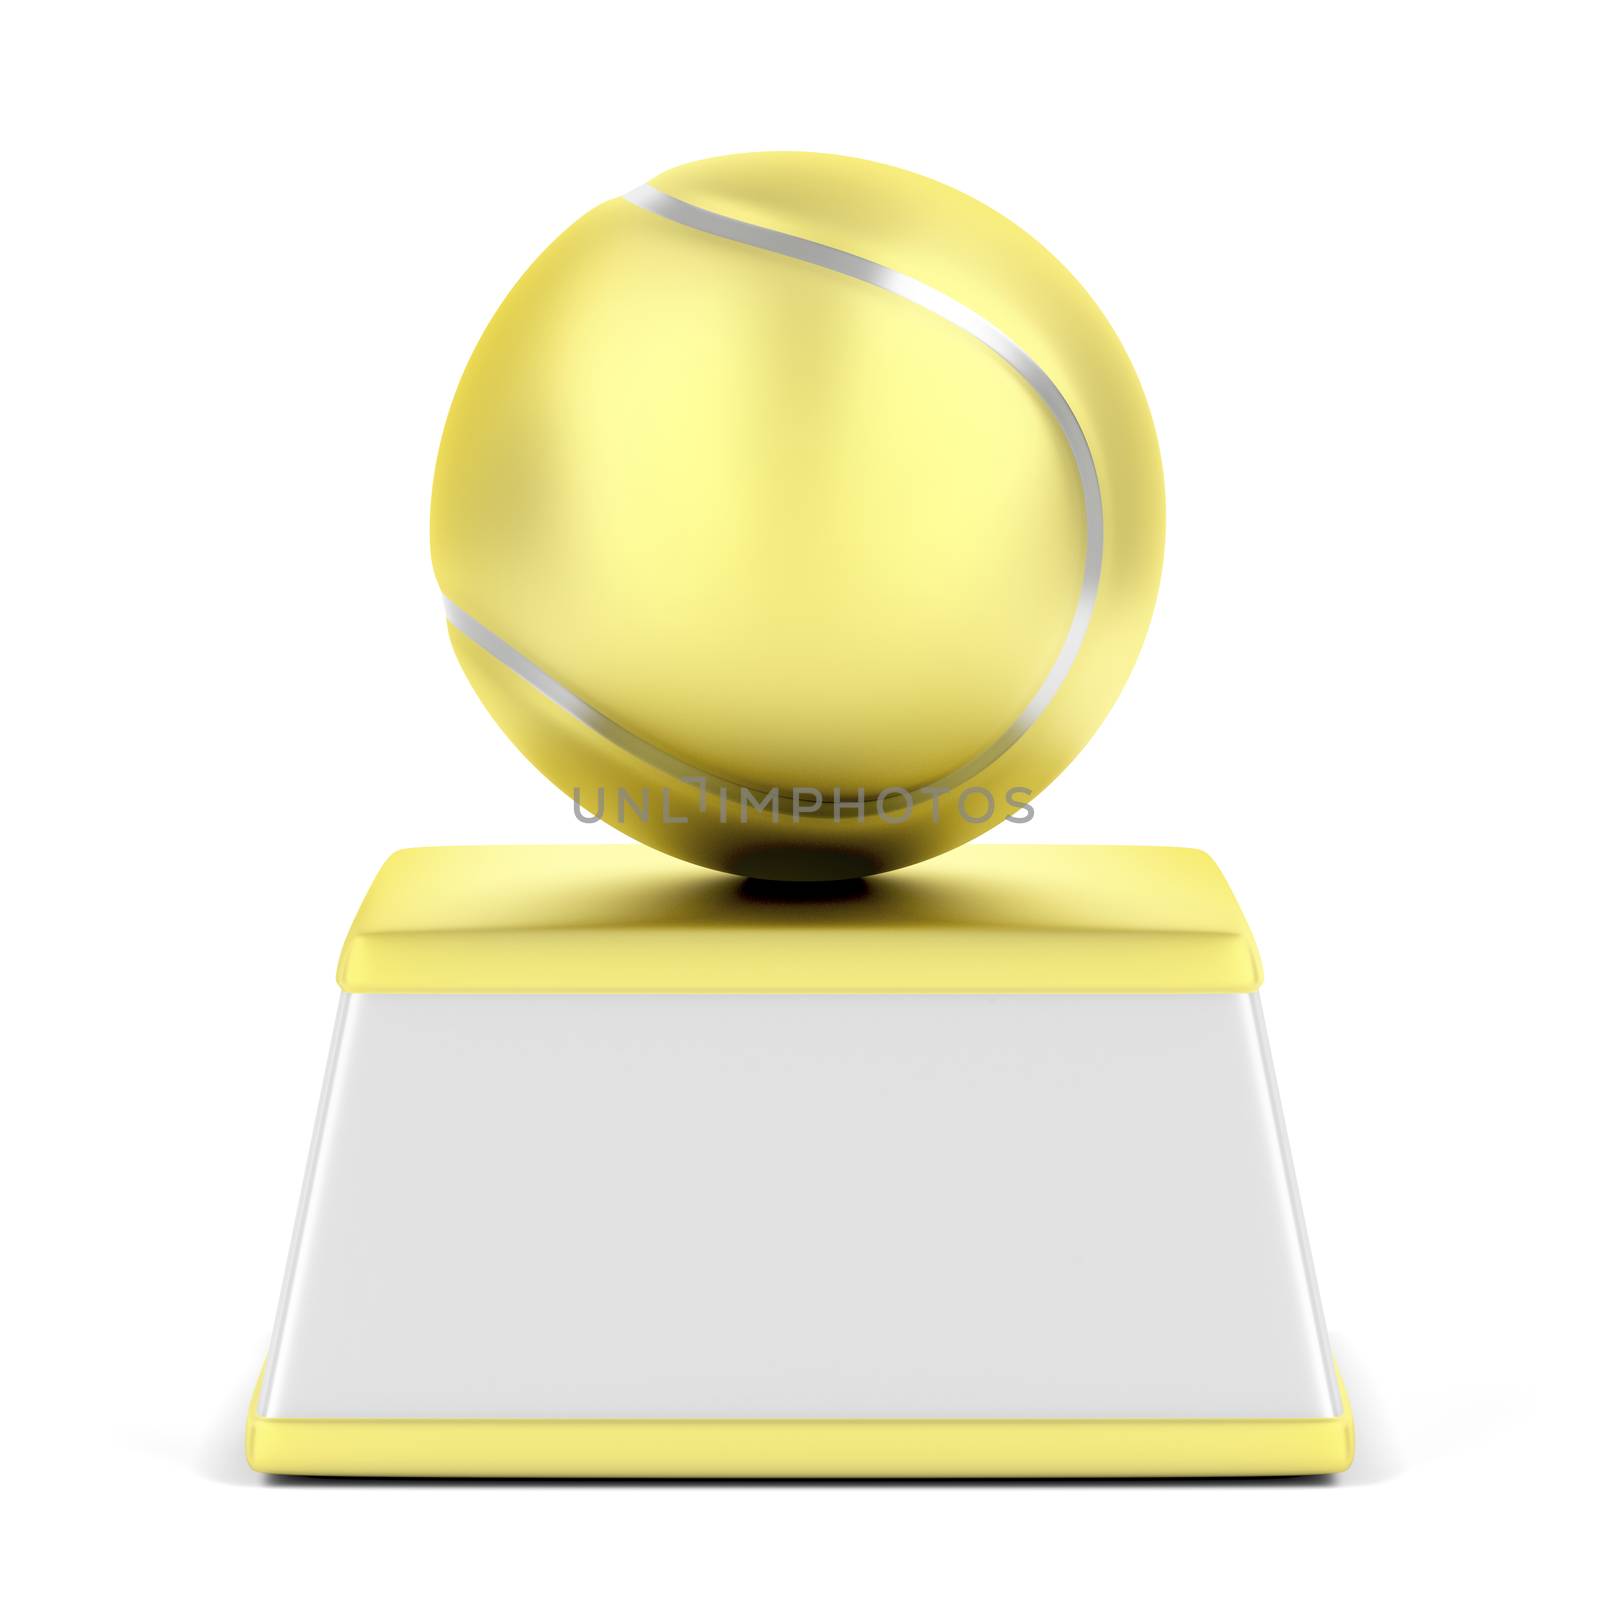 Gold tennis ball trophy on white background 